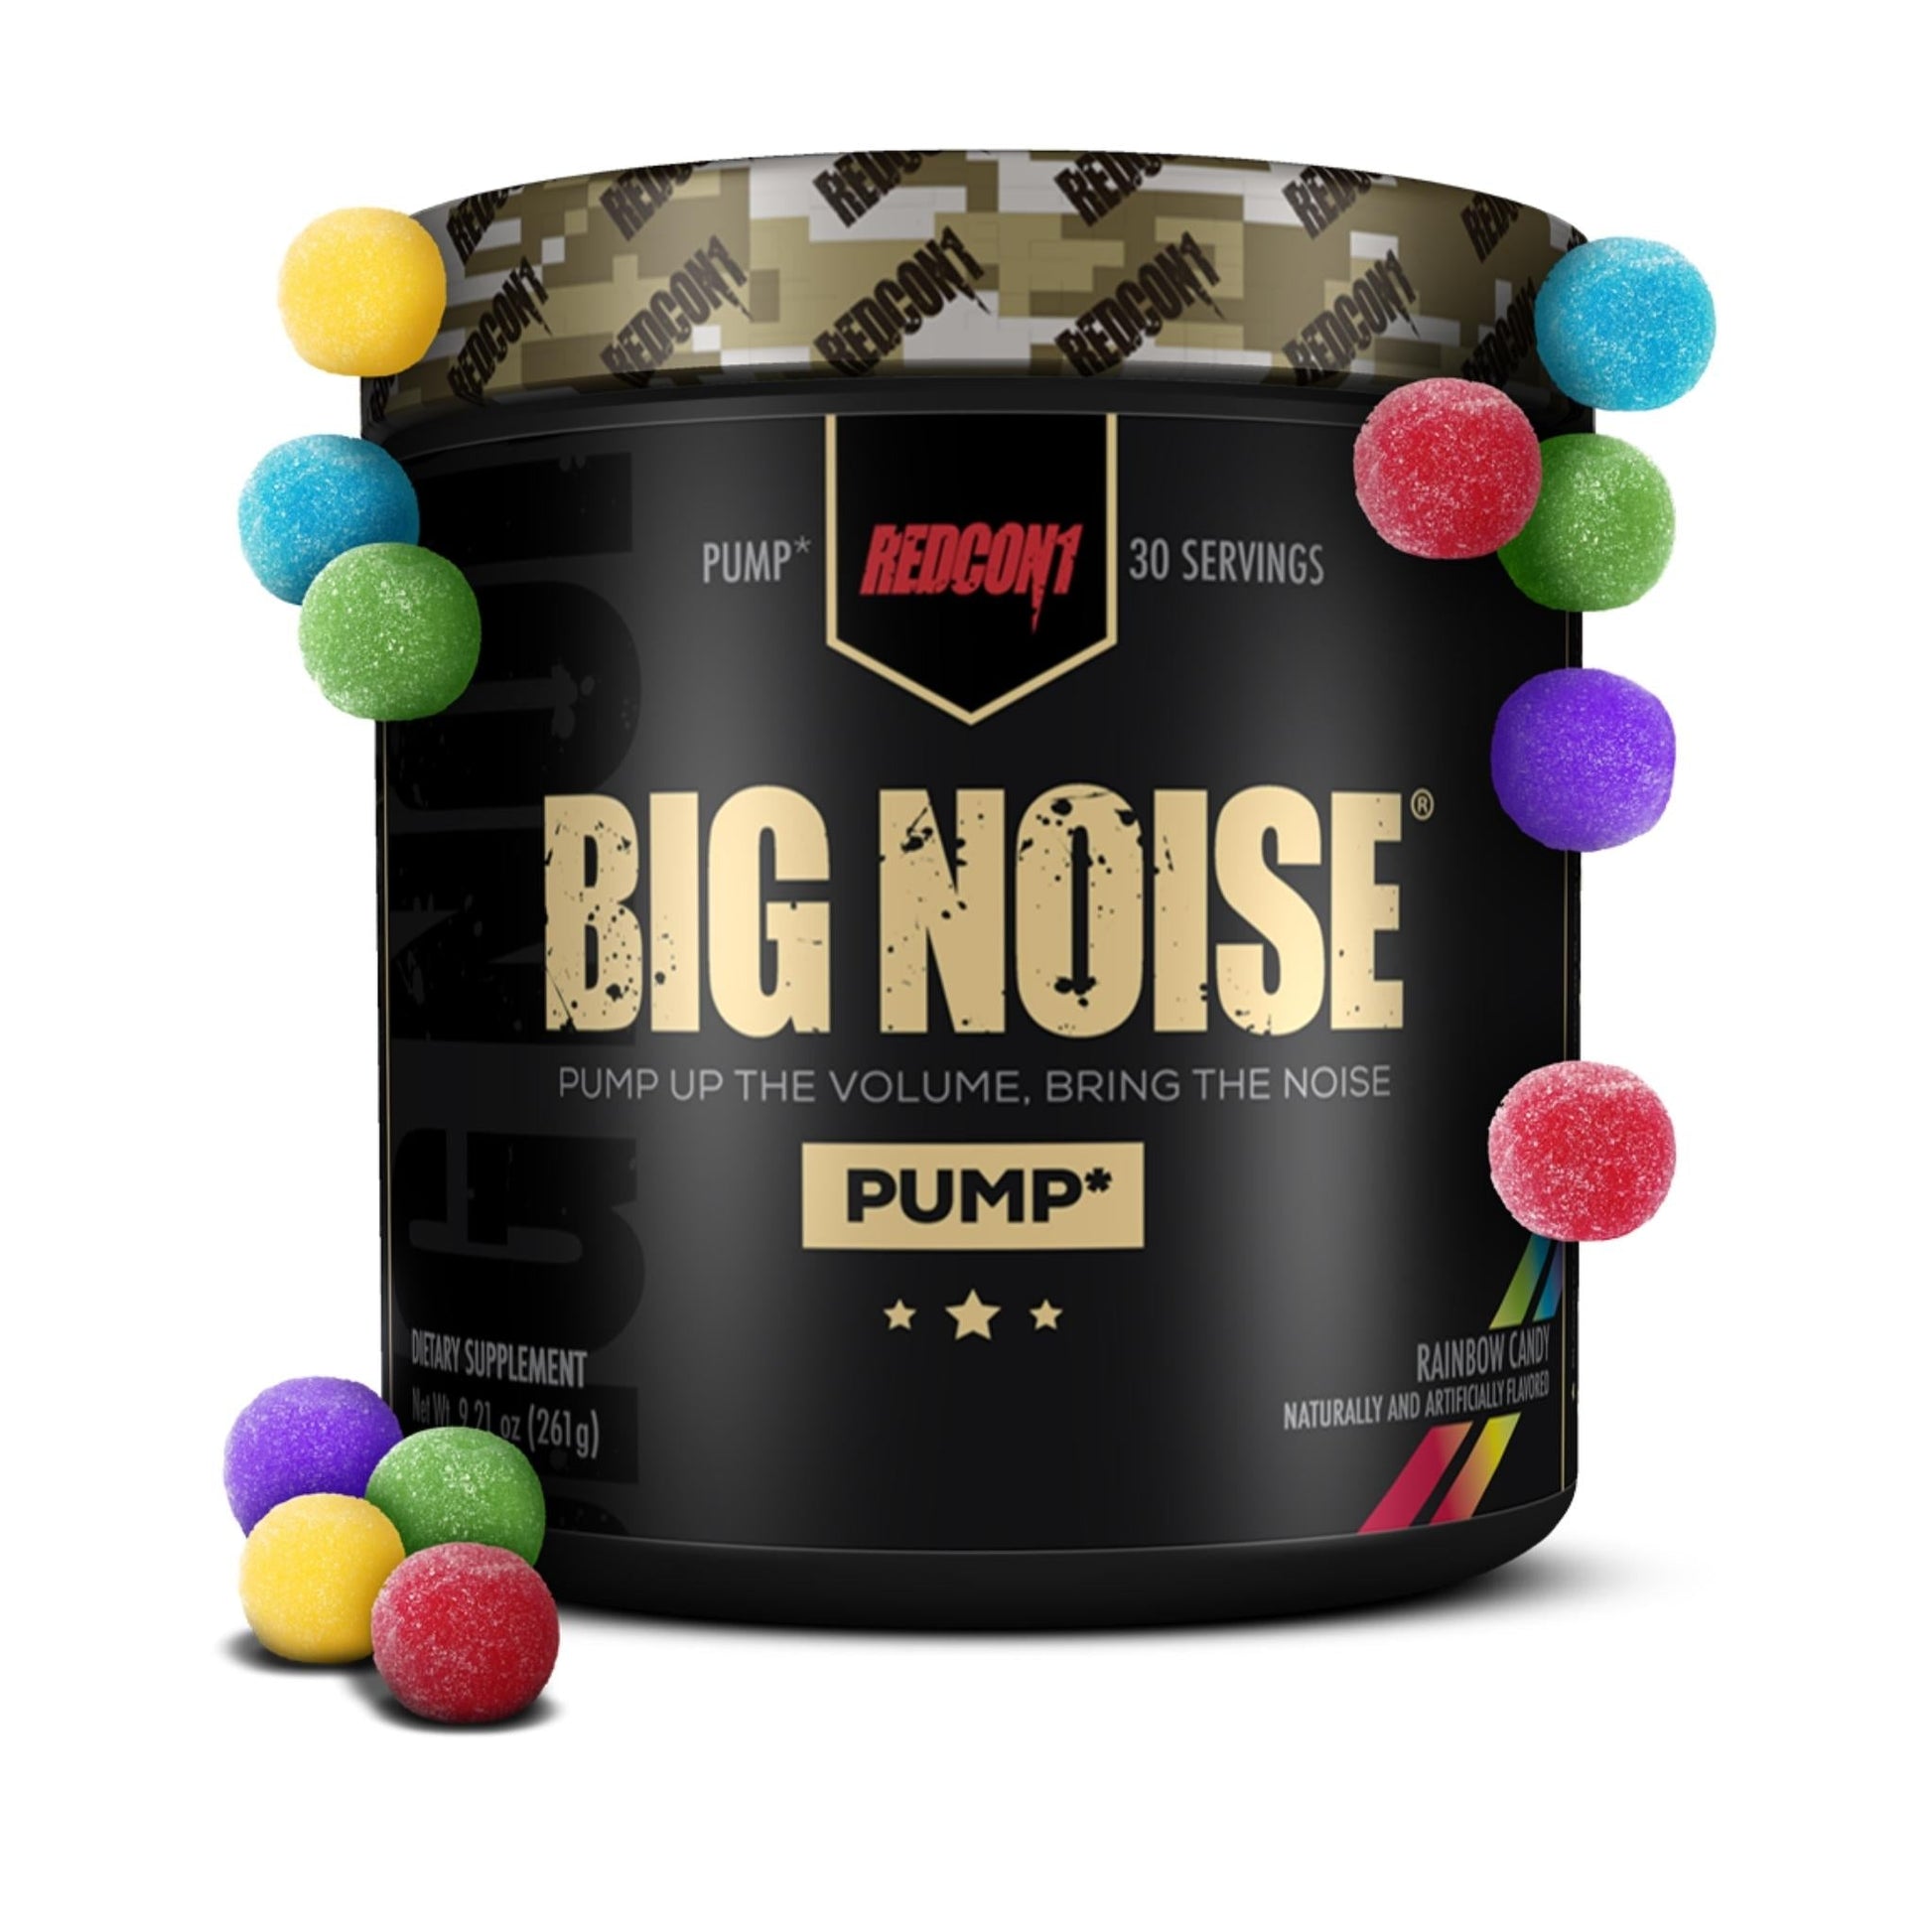 Redcon1 Big Noise Pump - 30 Serves - Supplements - Rainbow Candy - The Cave Gym